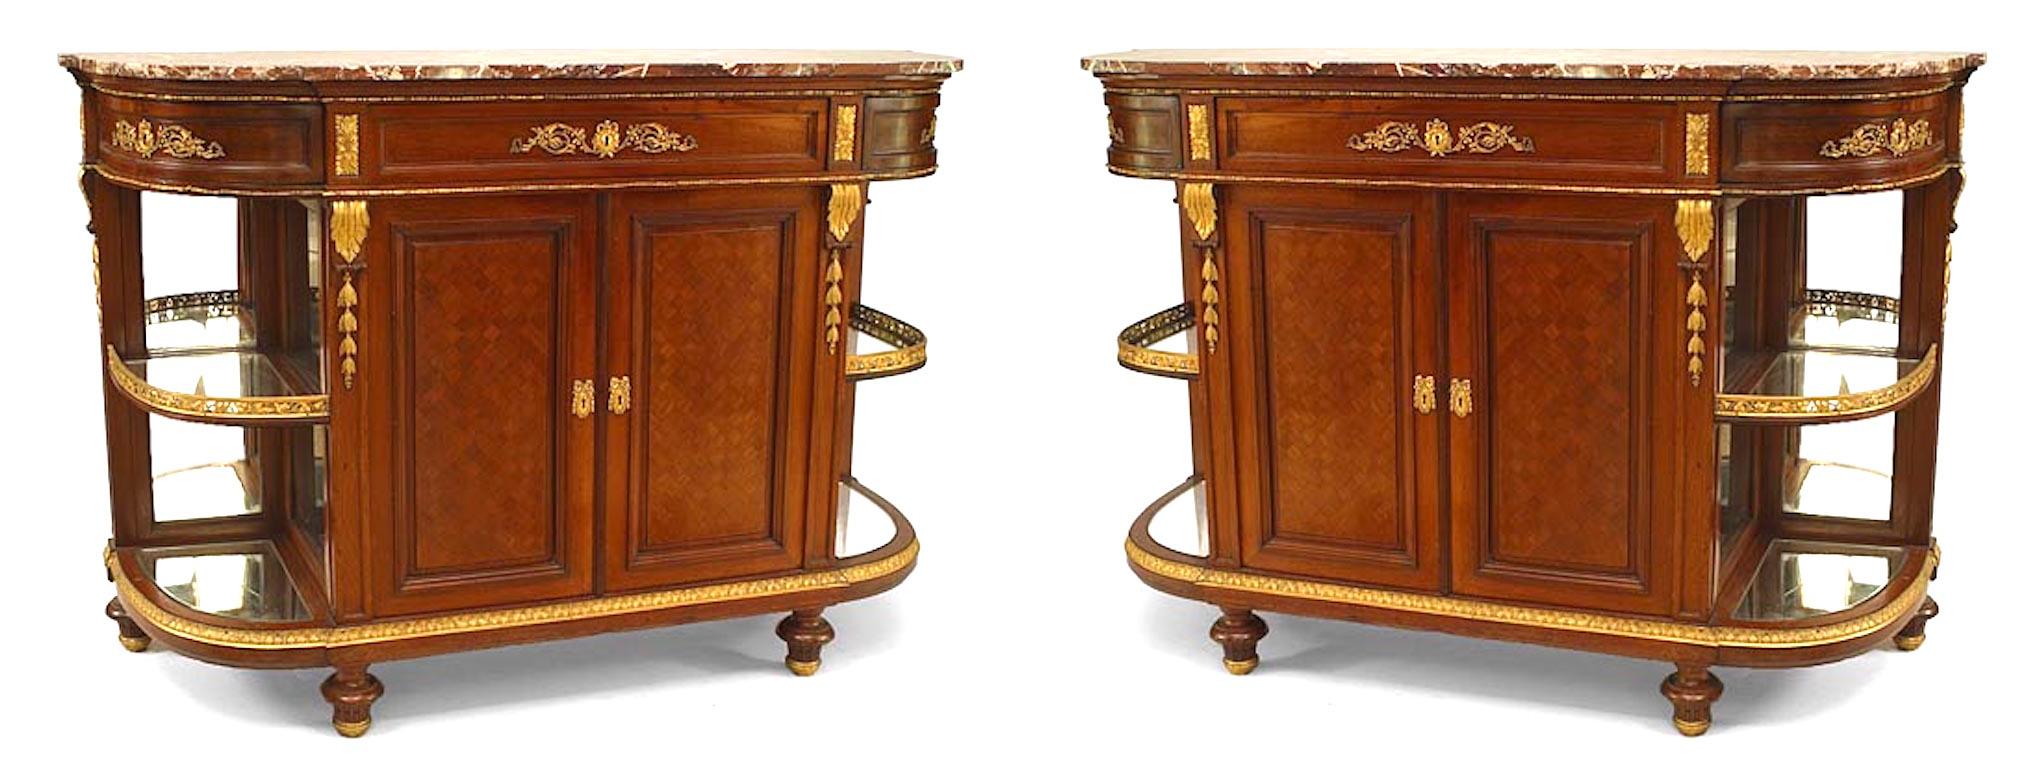 Pair of French Louis XVI Style bronze trimmed mahogany sideboards with curved mirrored side shelves and marble tops.